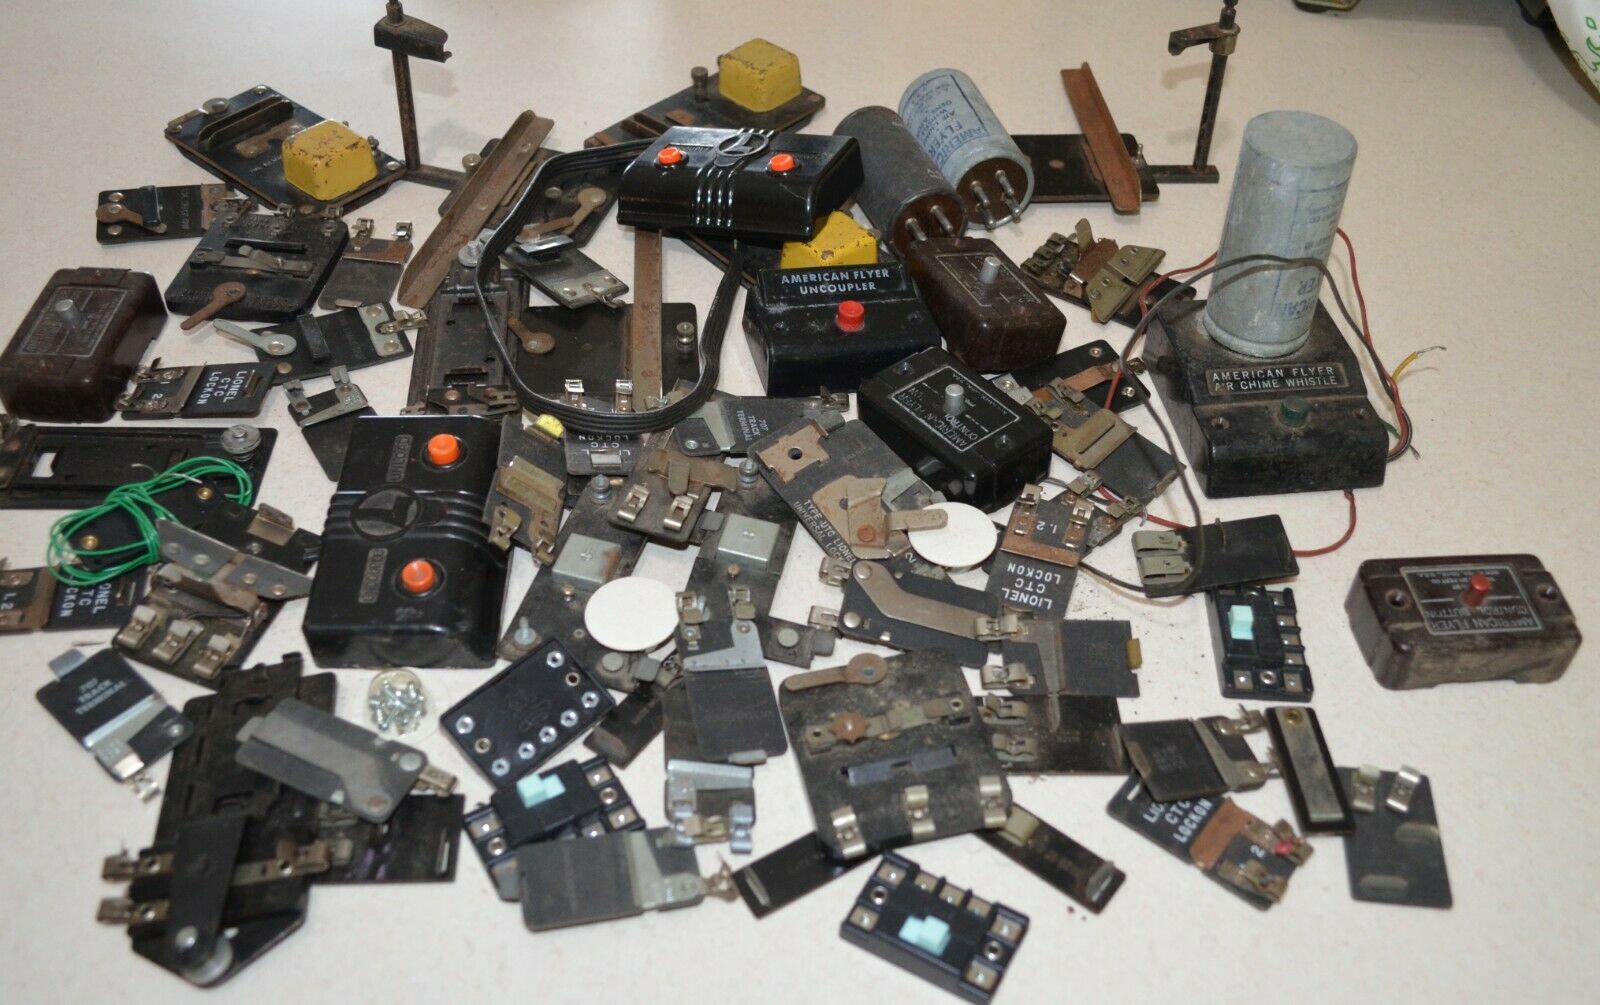 HUGE lot of Lionel and American flyer buttons, contacts, and do-dads!